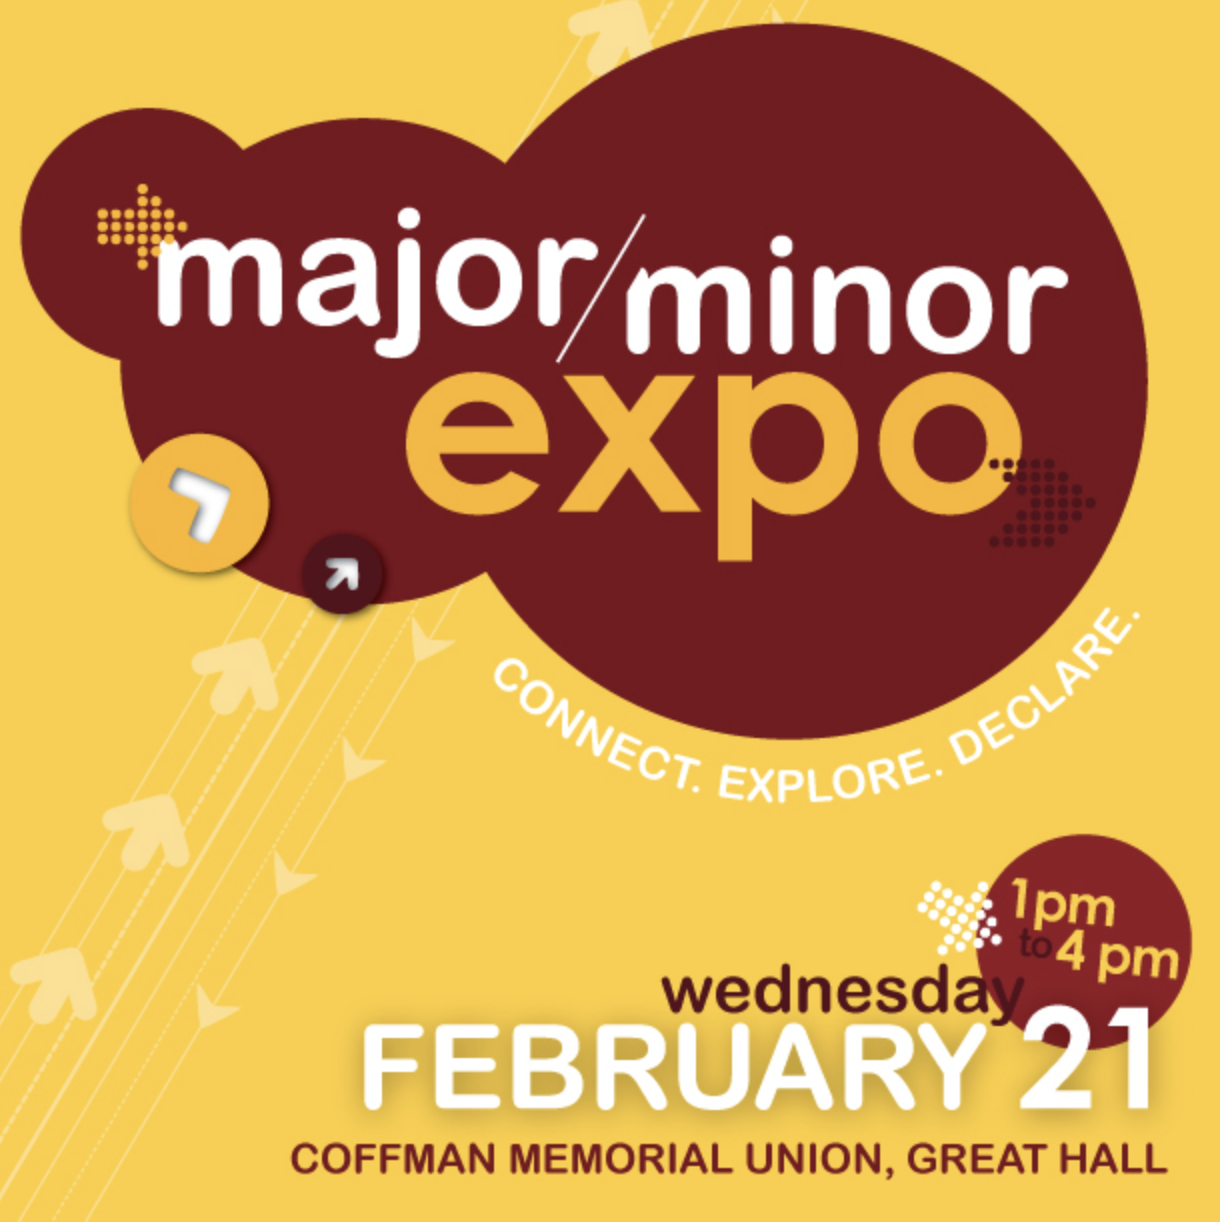 ad for the Major/Minor expo at the University of Minnesota - Wednesday, February 21 1pm-4pm, Coffman Memorial Union, Great Hall